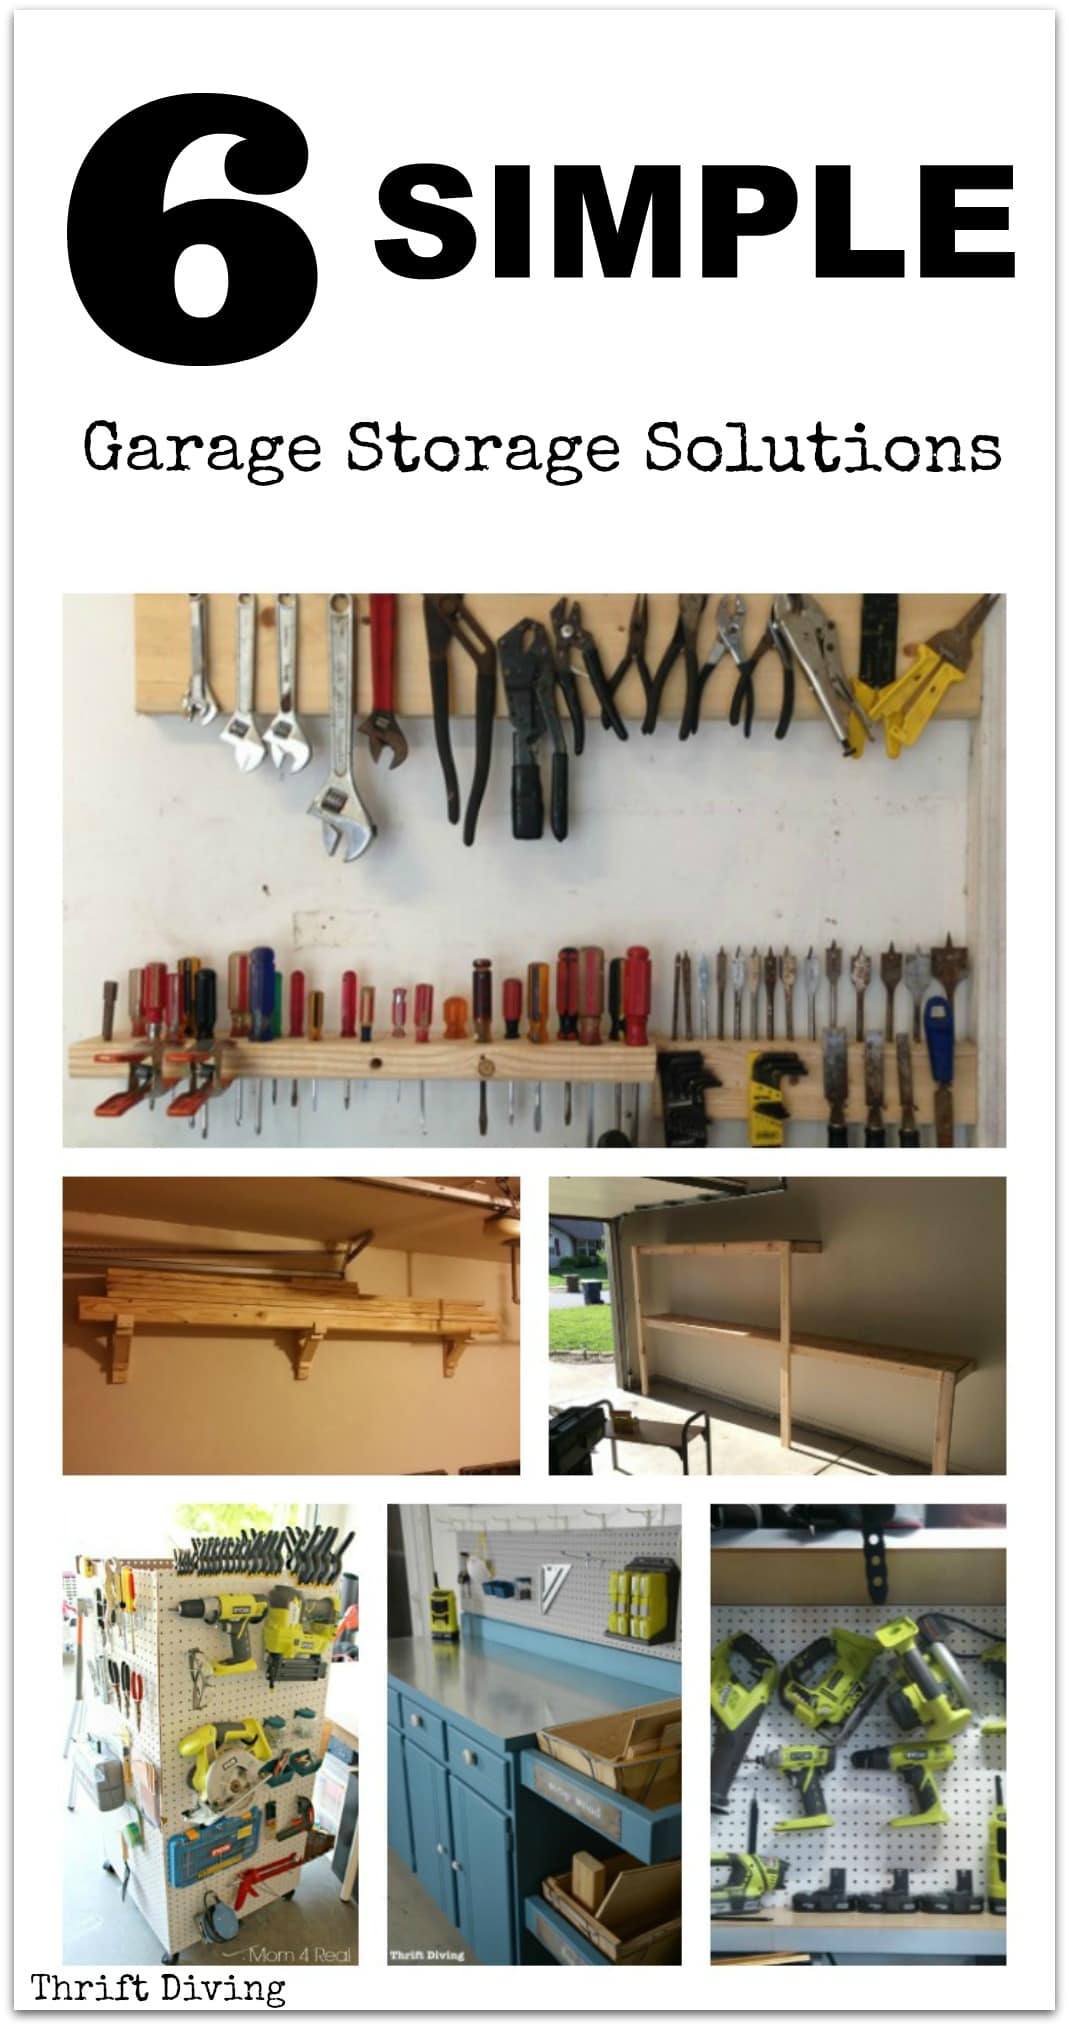 6 simple garage storage solutions that you can do yourself! - Thrift Diving